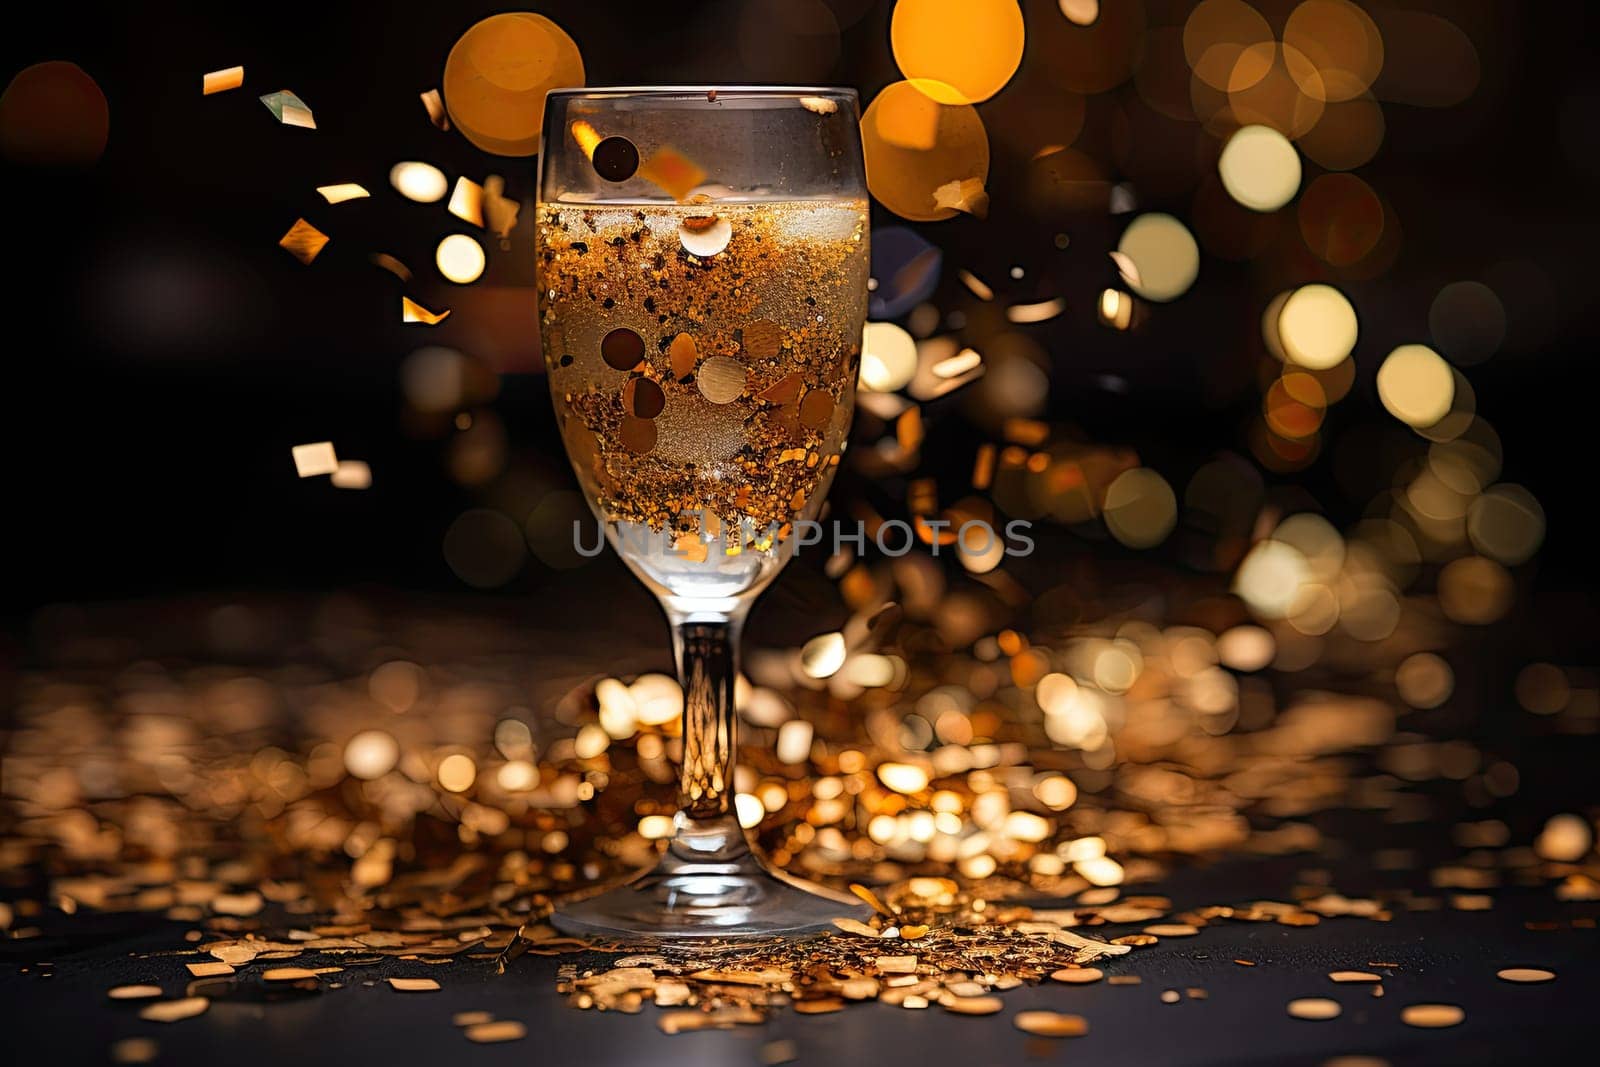 A Sparkling Celebration: Glass Filled With Liquid and Shimmering Gold Confetti